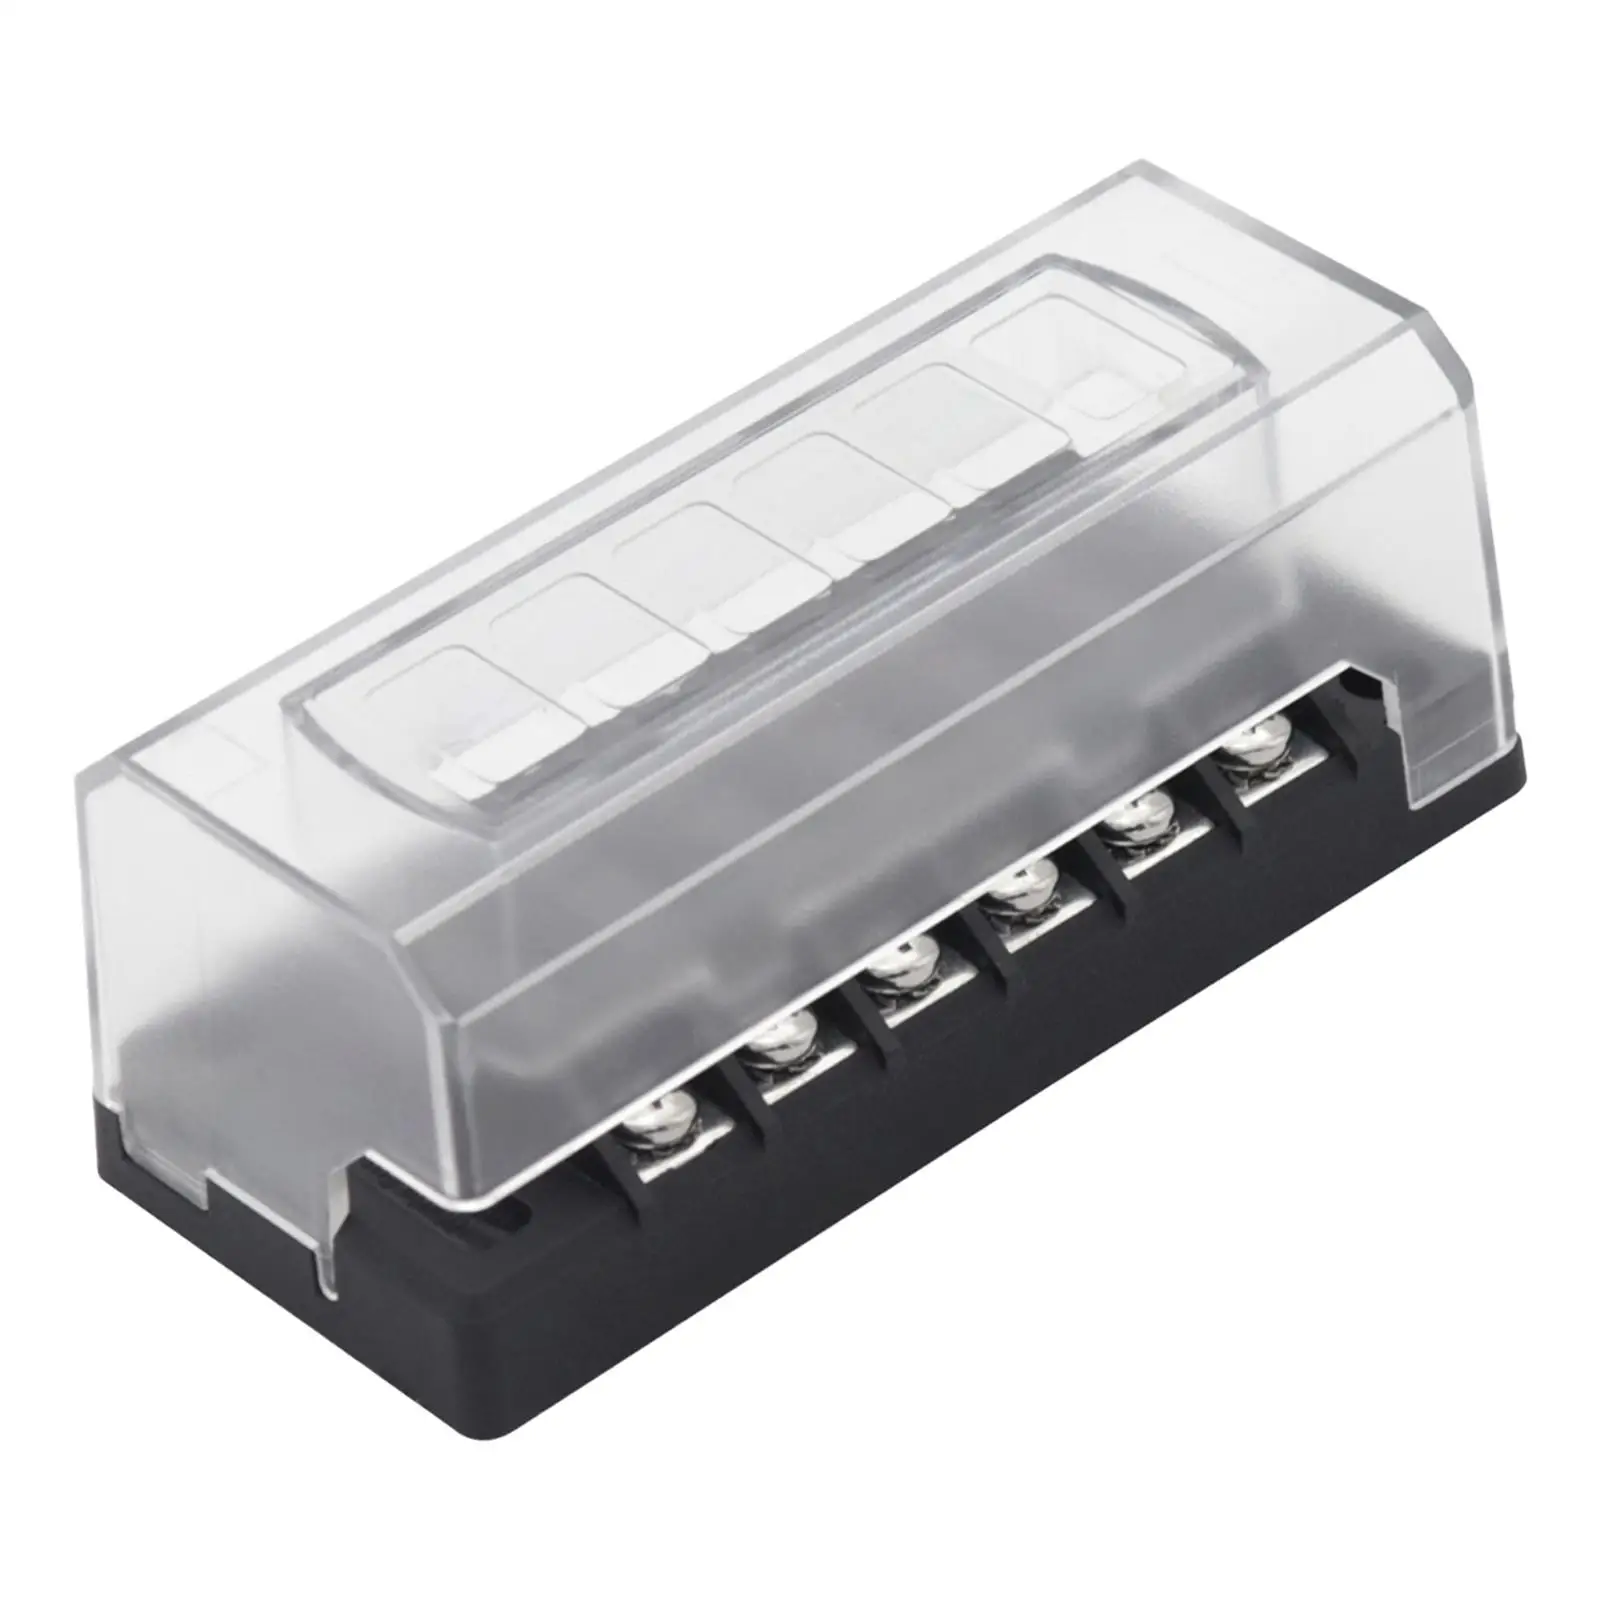 6-Way Blade Fuse Block Box Waterproof Cover Independent Circuits ATC ATO Holde - £22.32 GBP